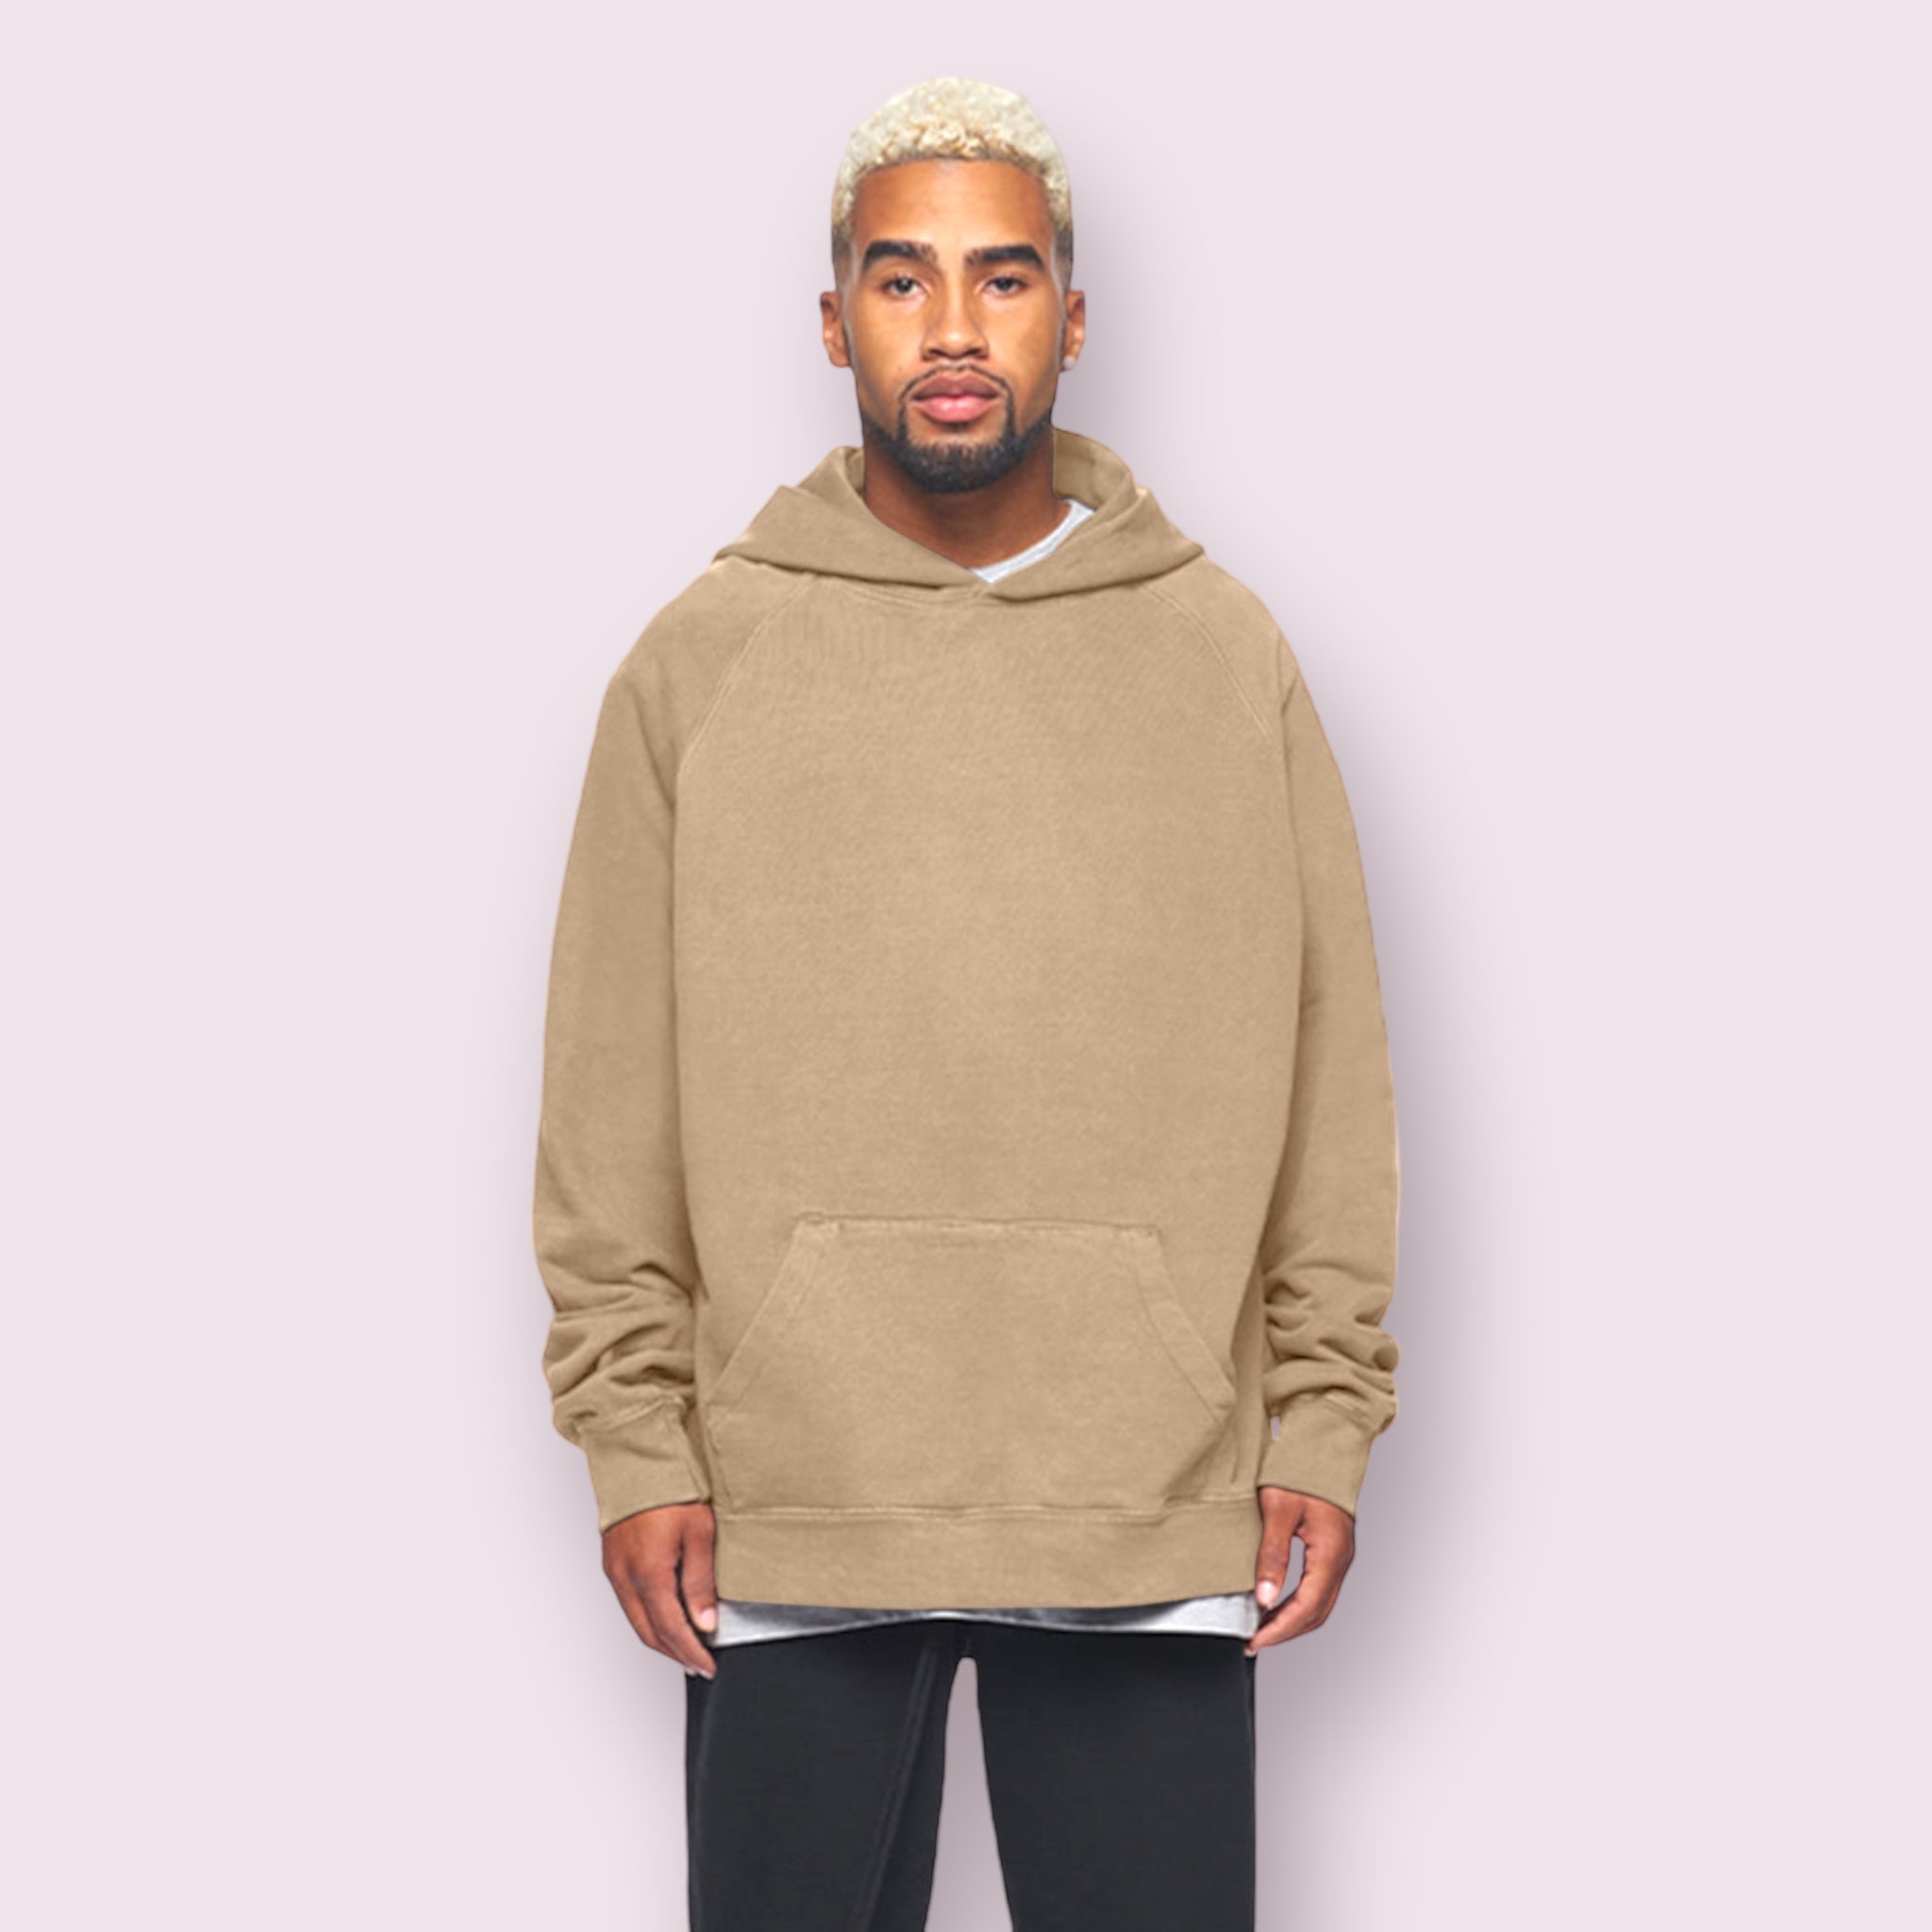 TS14000FT | Max Weight Hoodies Pigment Dyed Black / 2XL